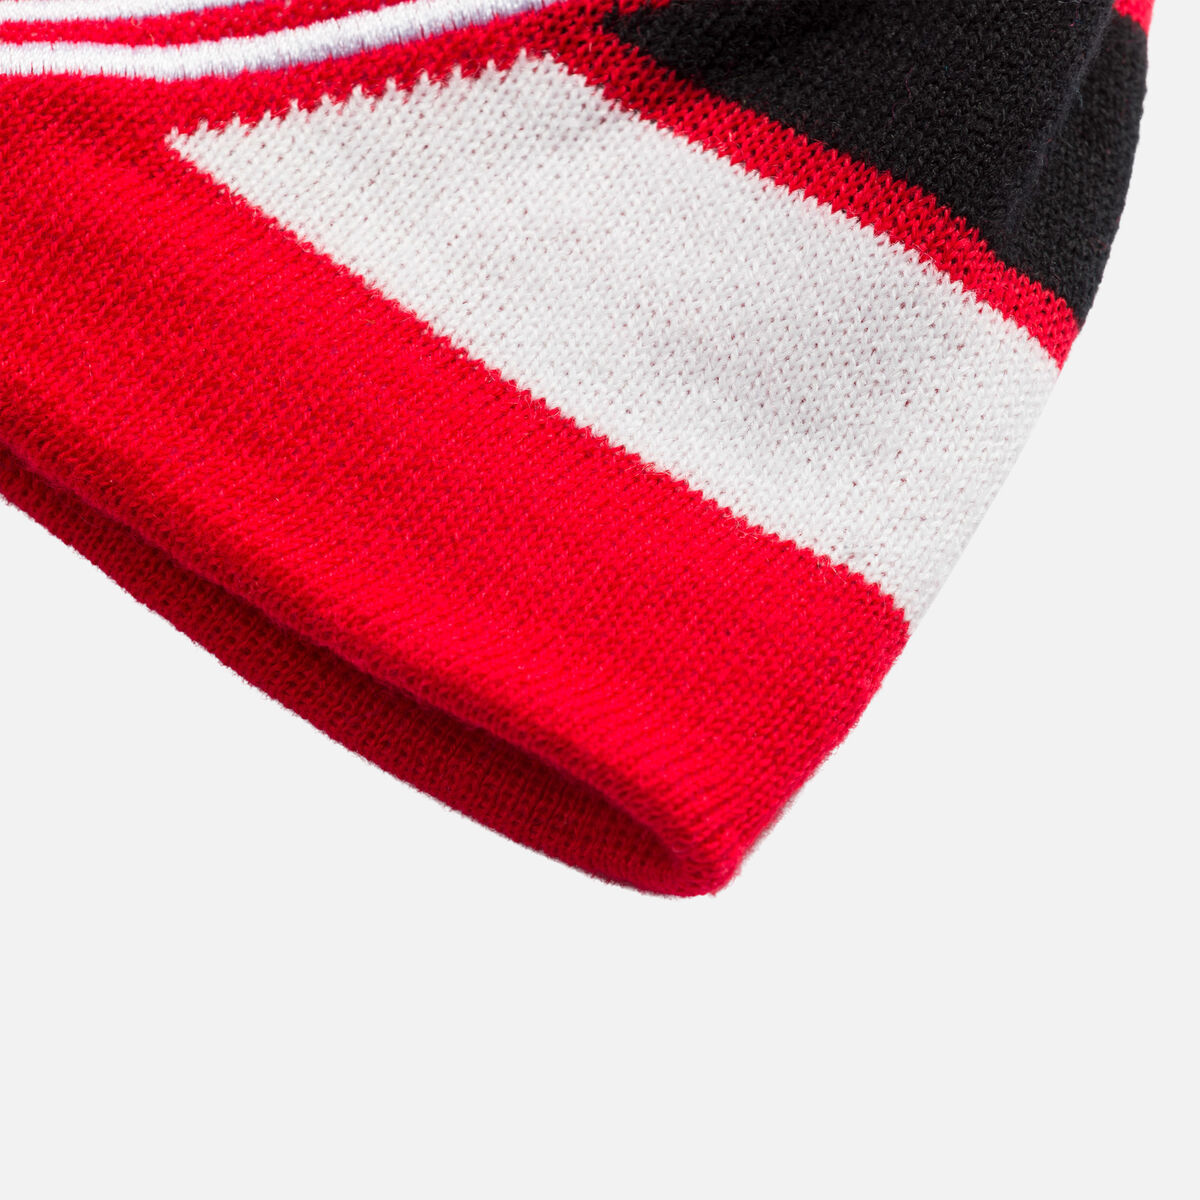 Rossignol Juniors' Rooster Beanie Red